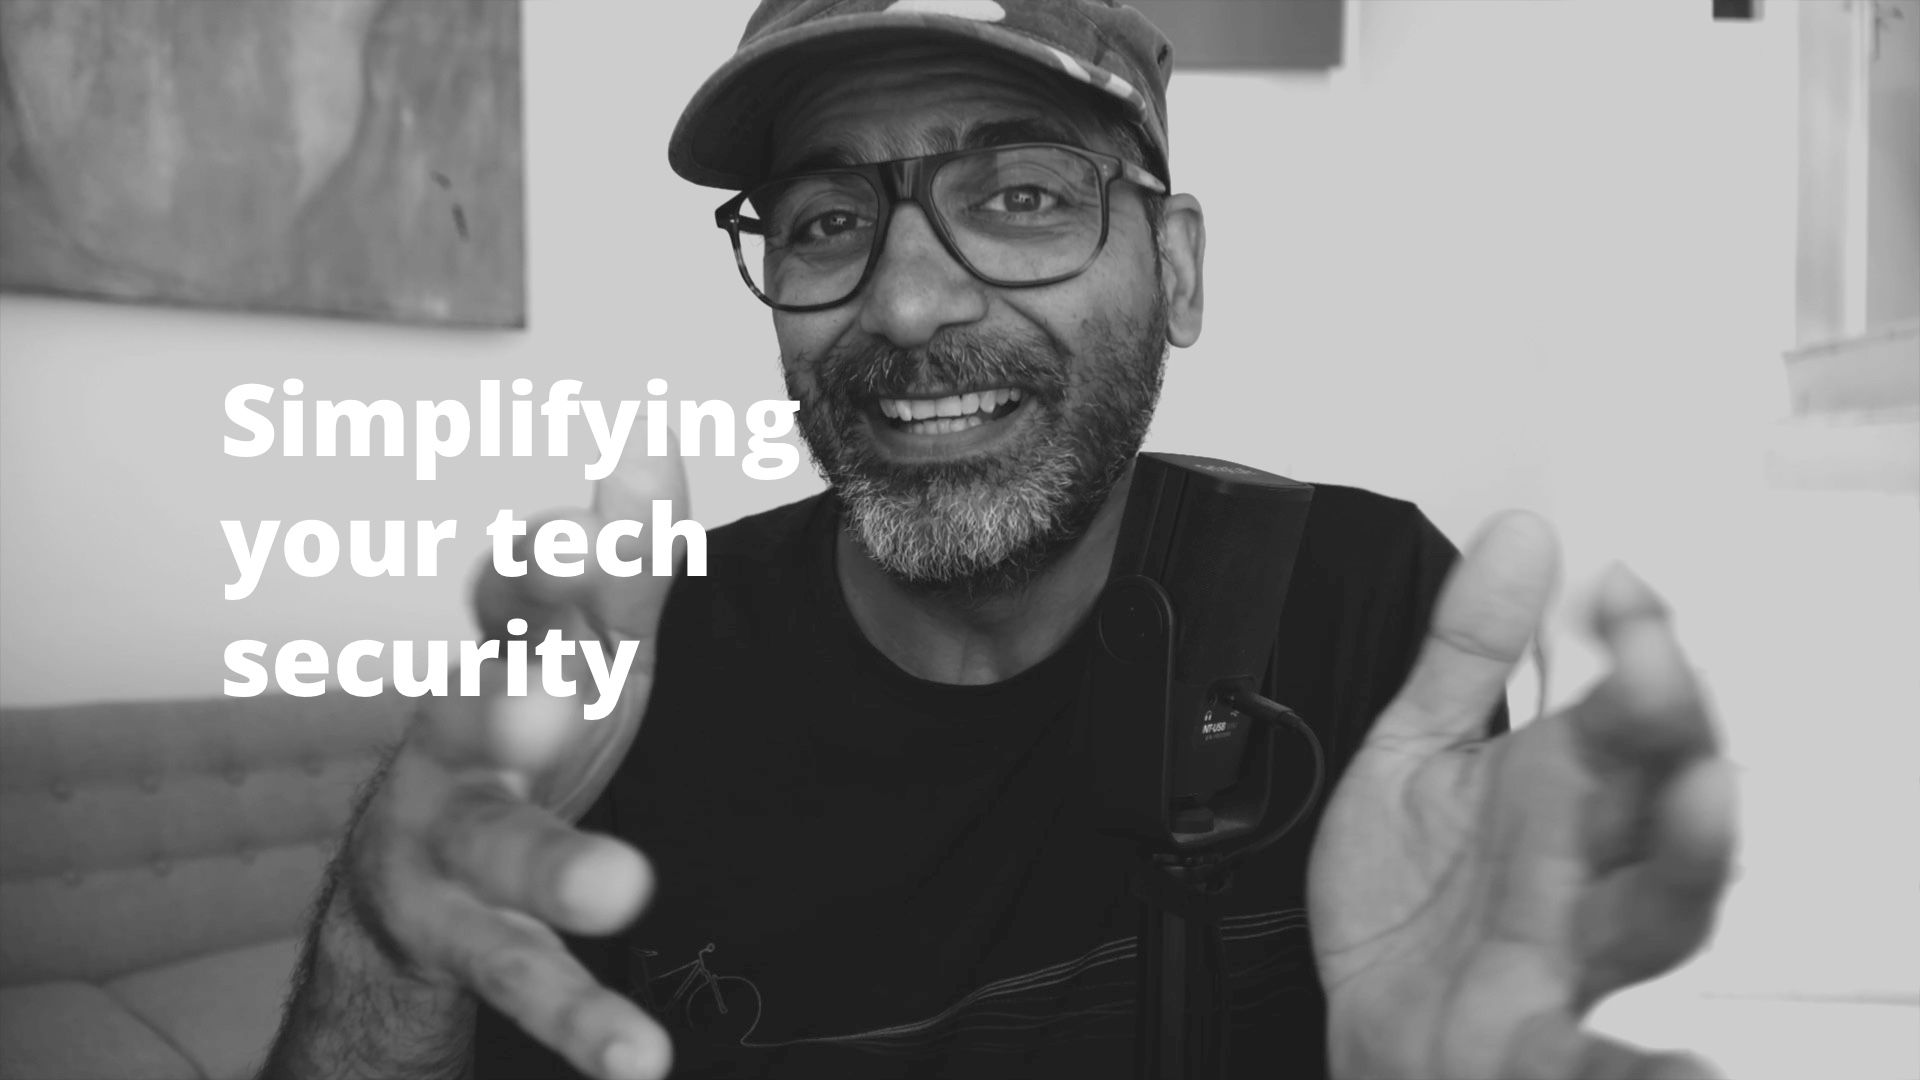 Simplifying your tech security